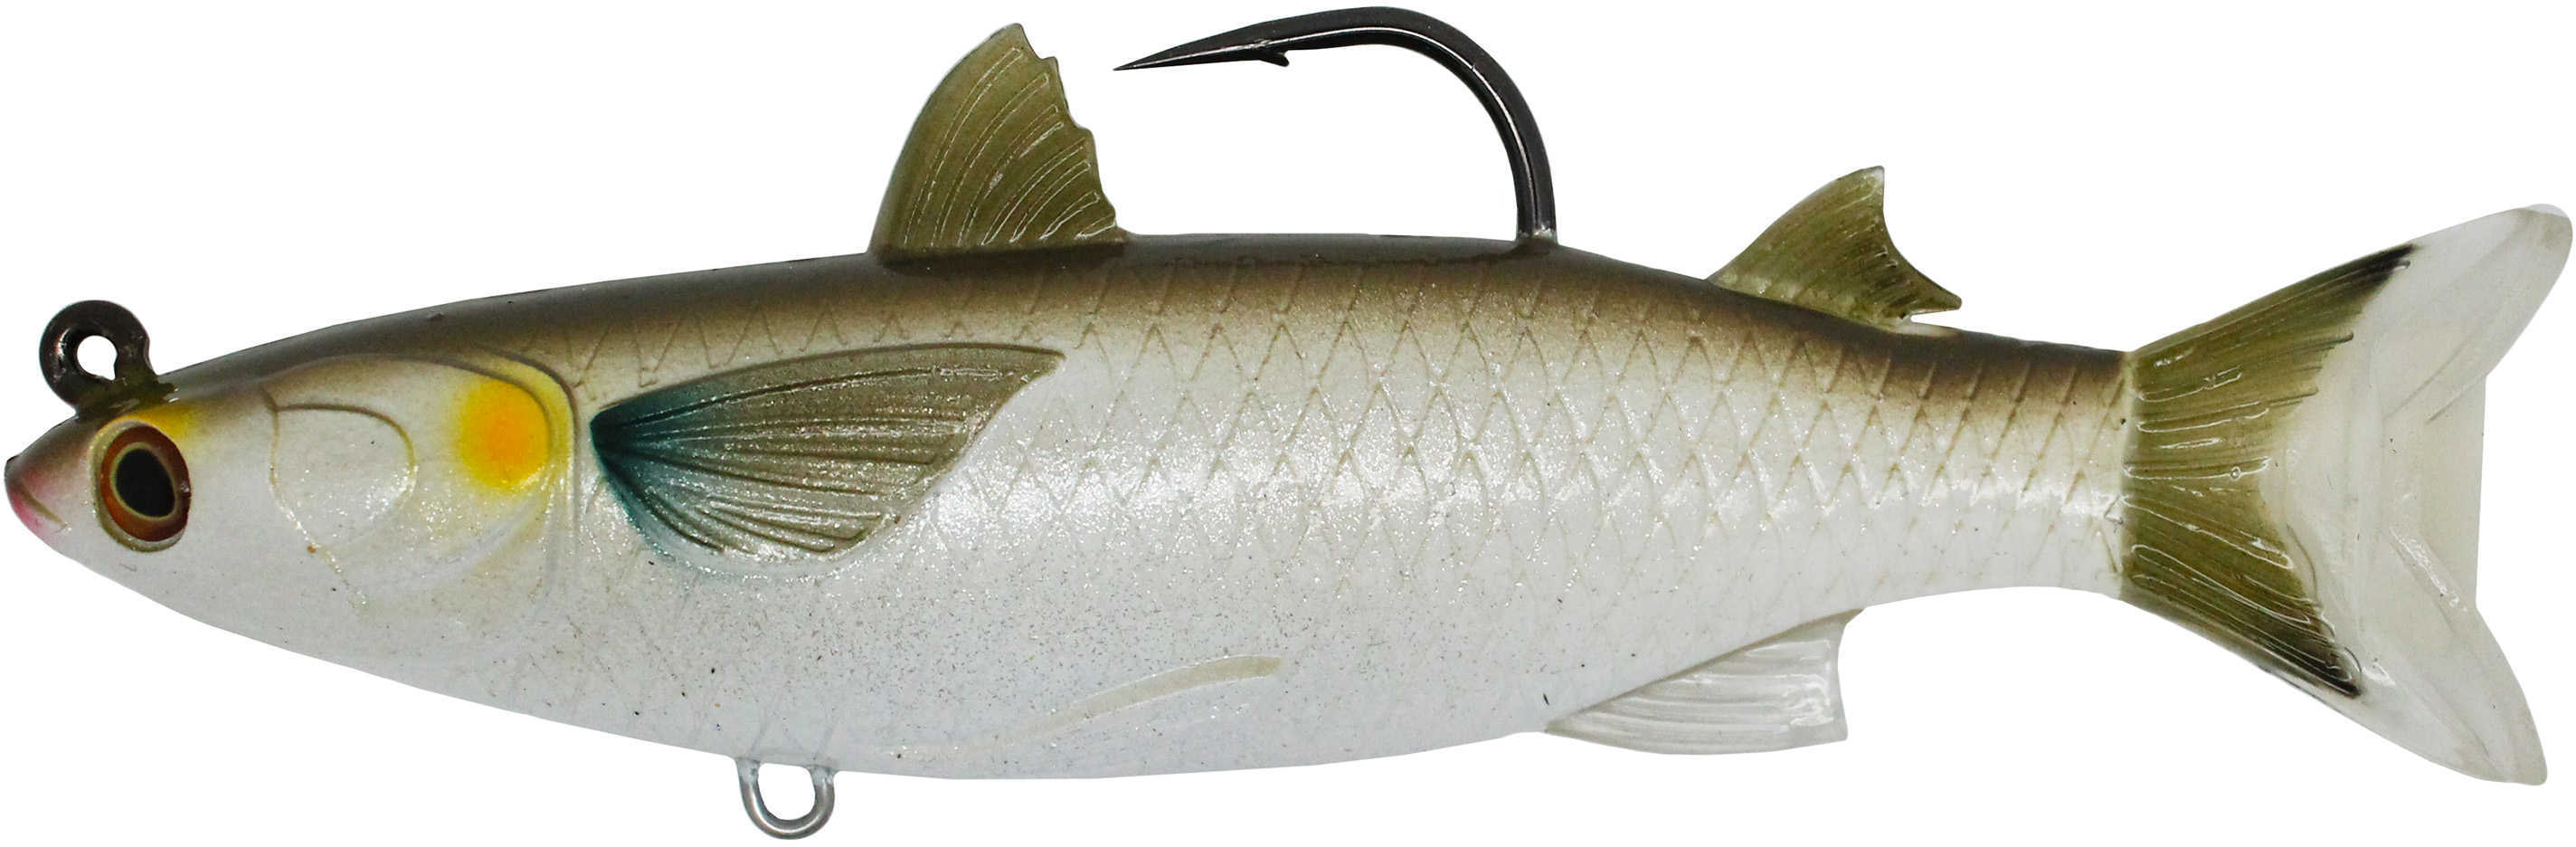 LIVETARGET Lures / Koppers Fishing and Tackle Corp Mullet Twitchbait Saltwater 4.5 Inches 7/0 Hook Medium/Slow Sinking Silver Md: